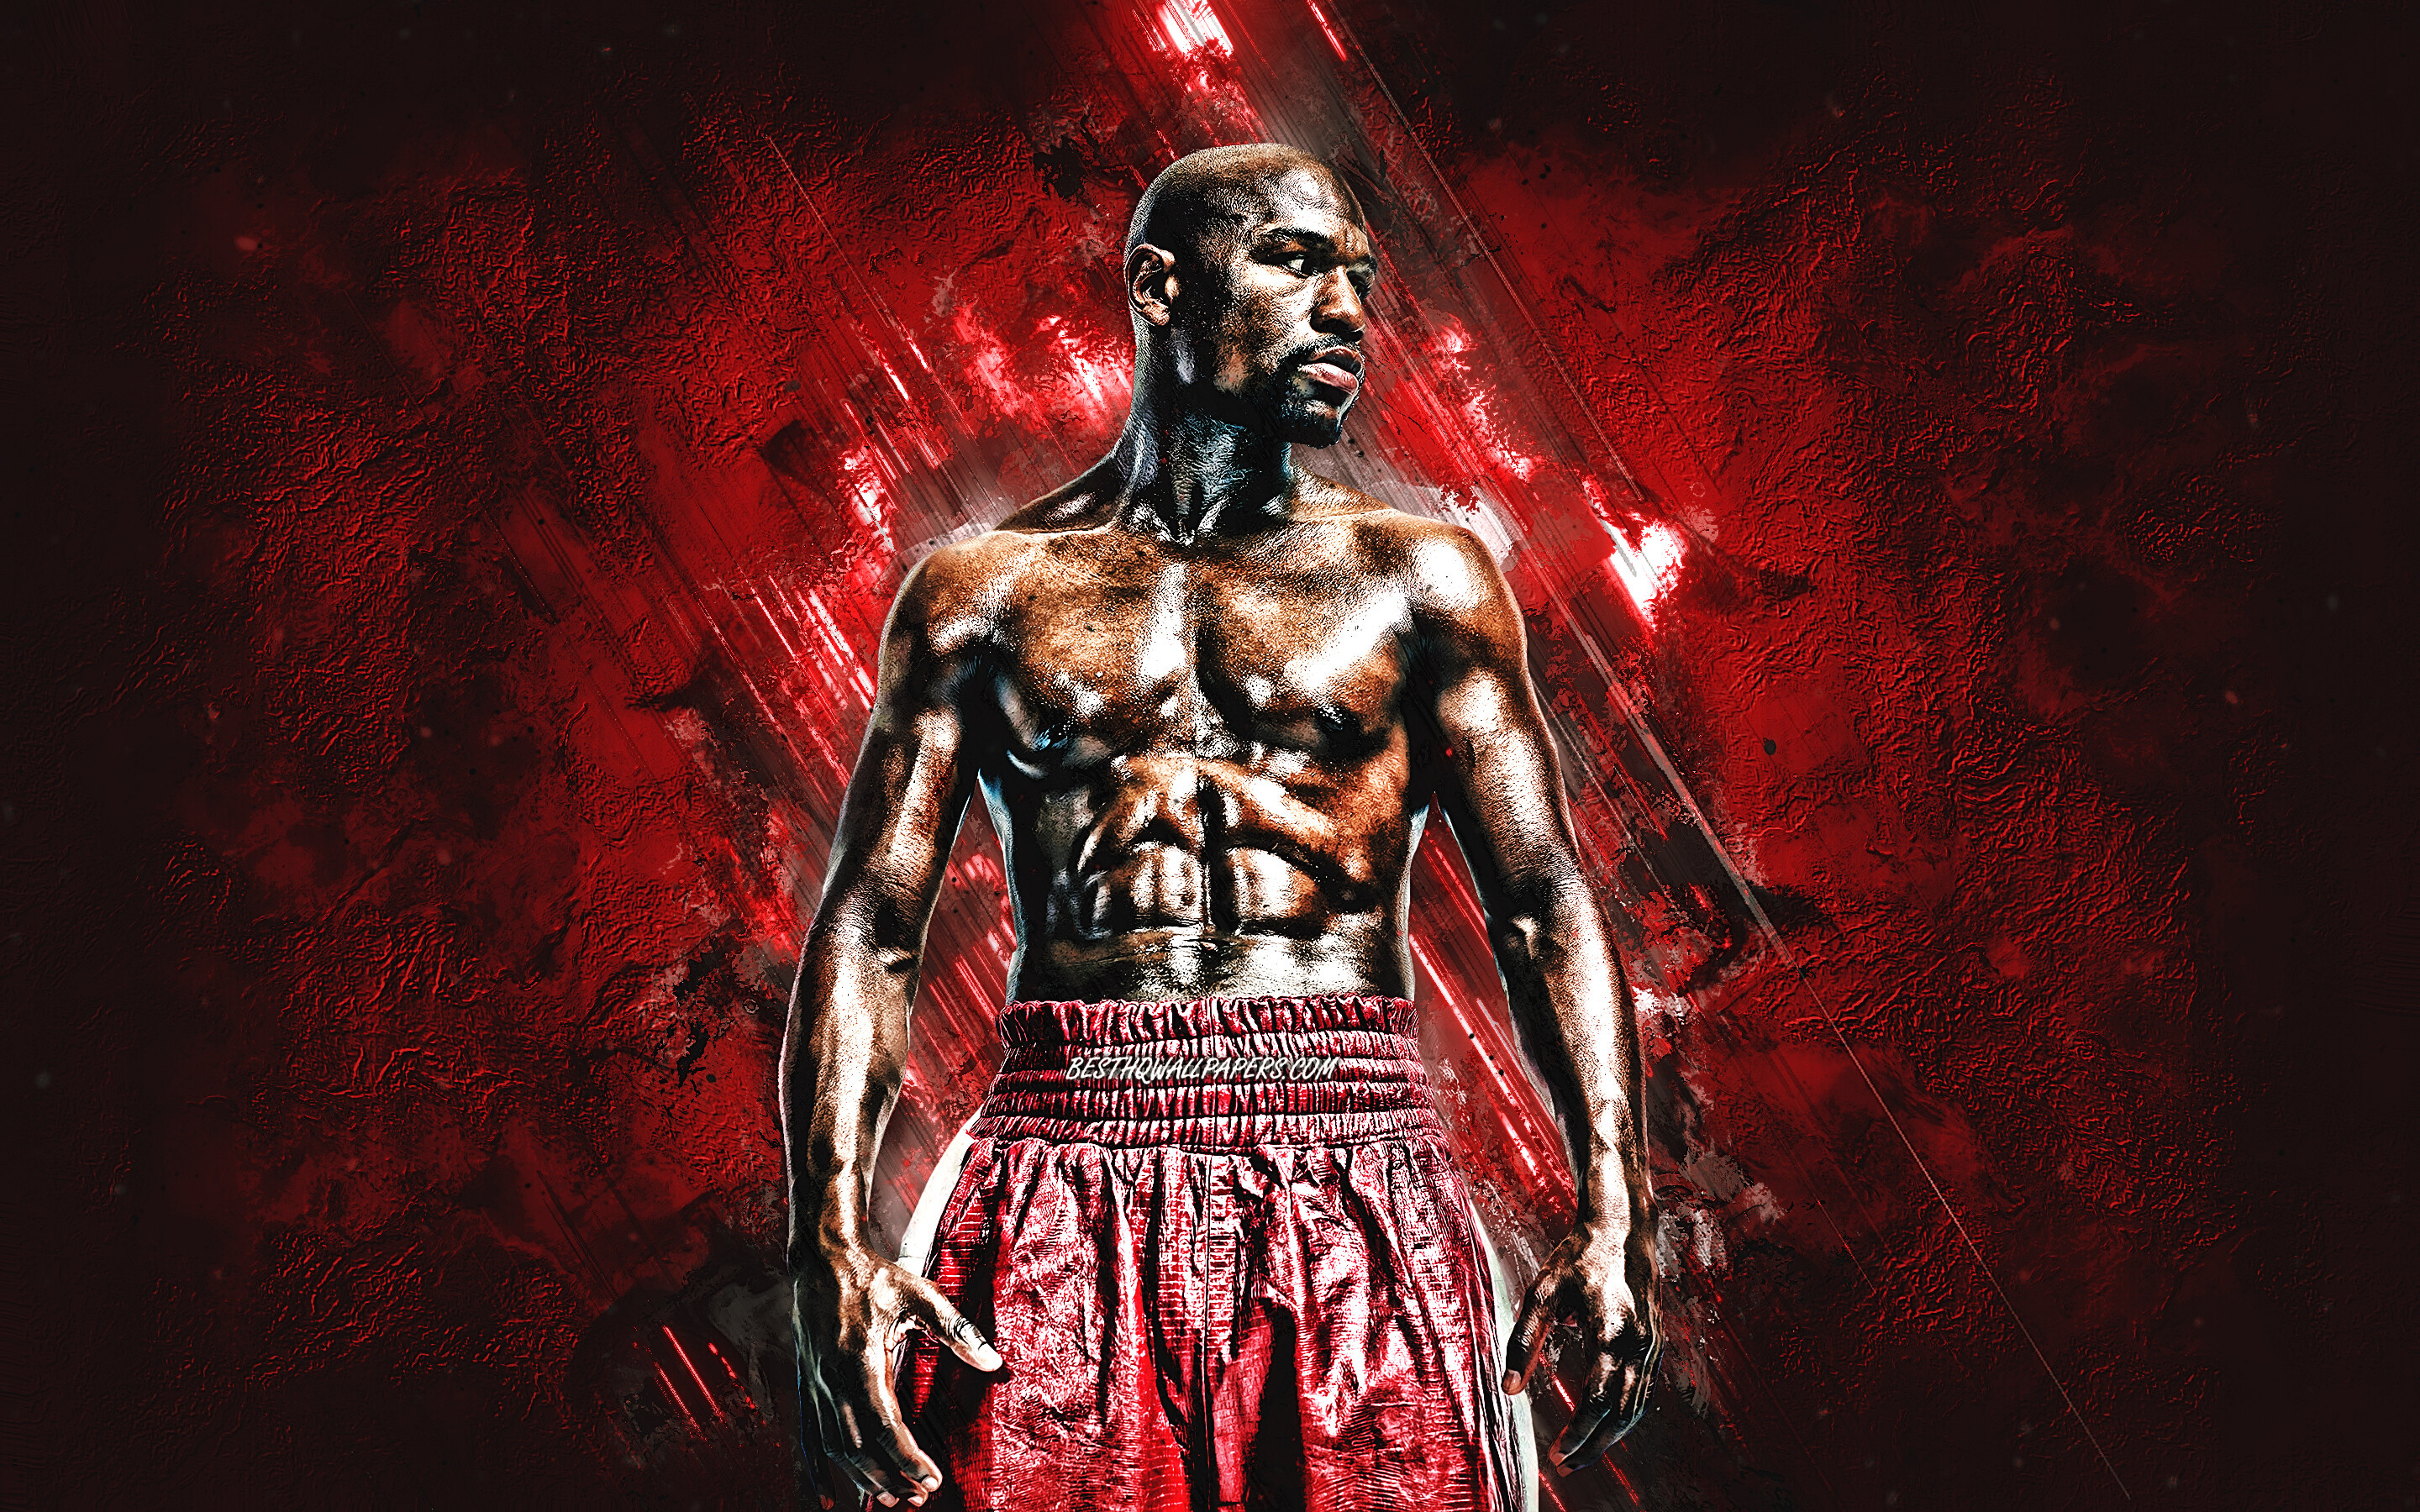 Floyd Mayweather: The most accurate puncher since the existence of CompuBox, having the highest plus-minus ratio in recorded boxing history. 2880x1800 HD Background.